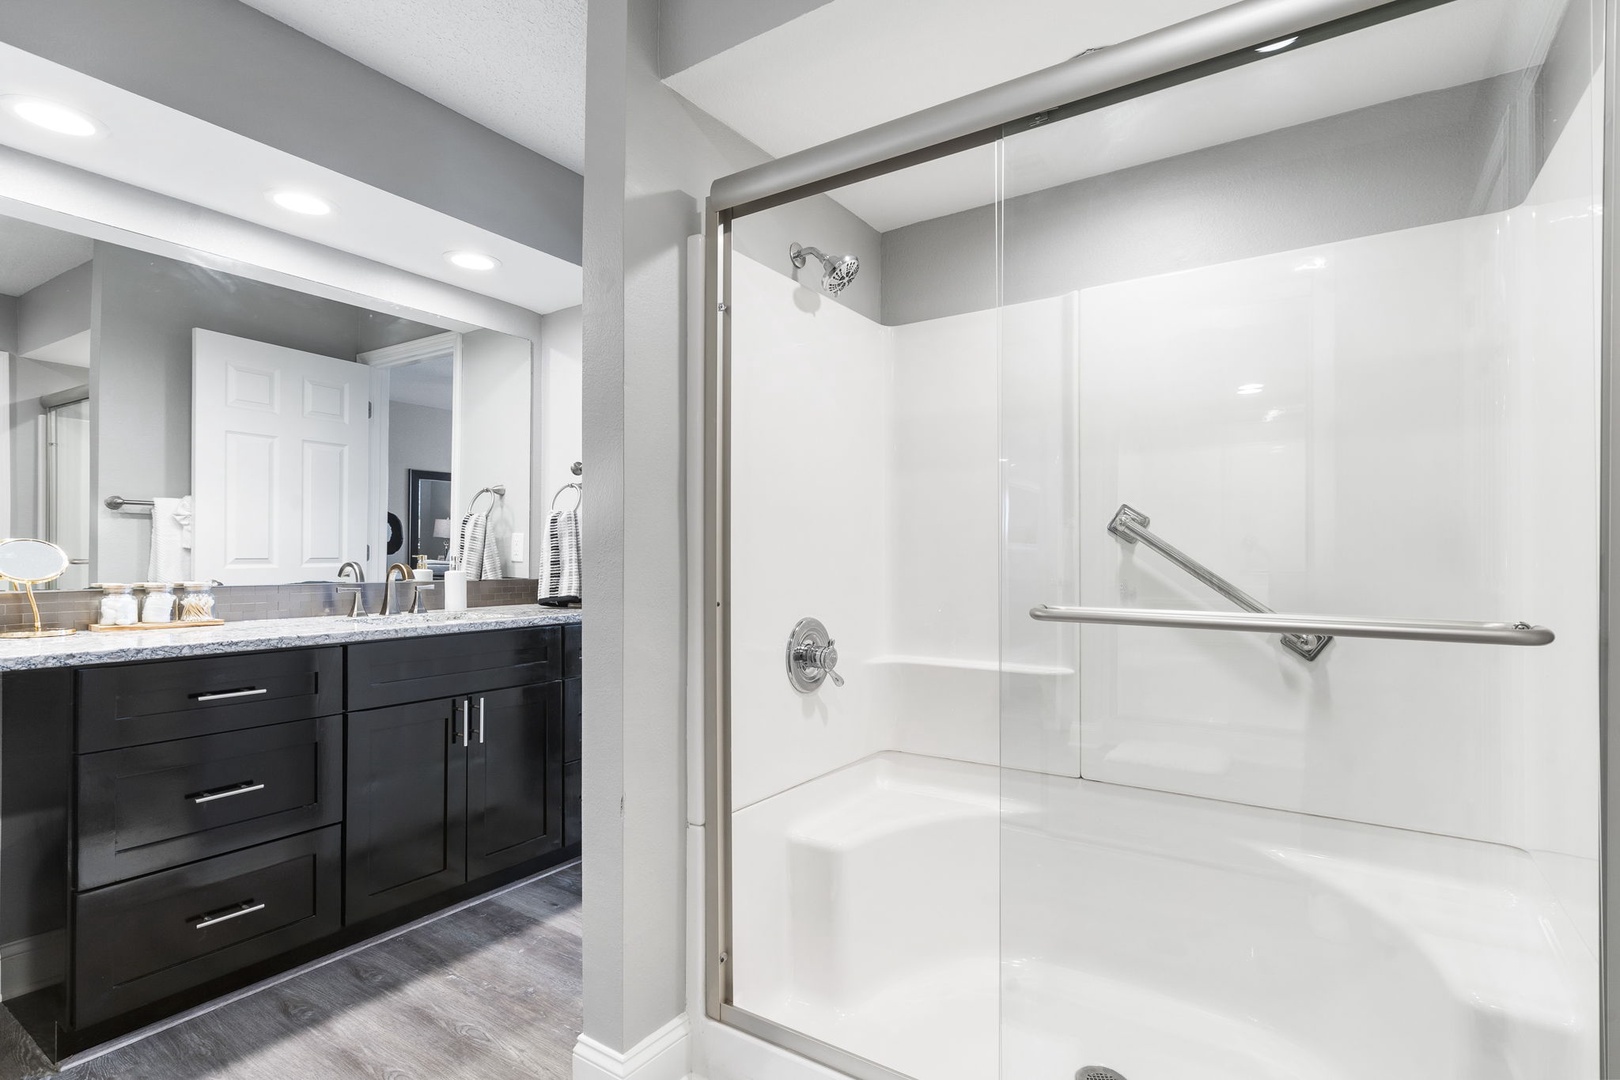 The second ensuite includes an oversized vanity & walk-in shower